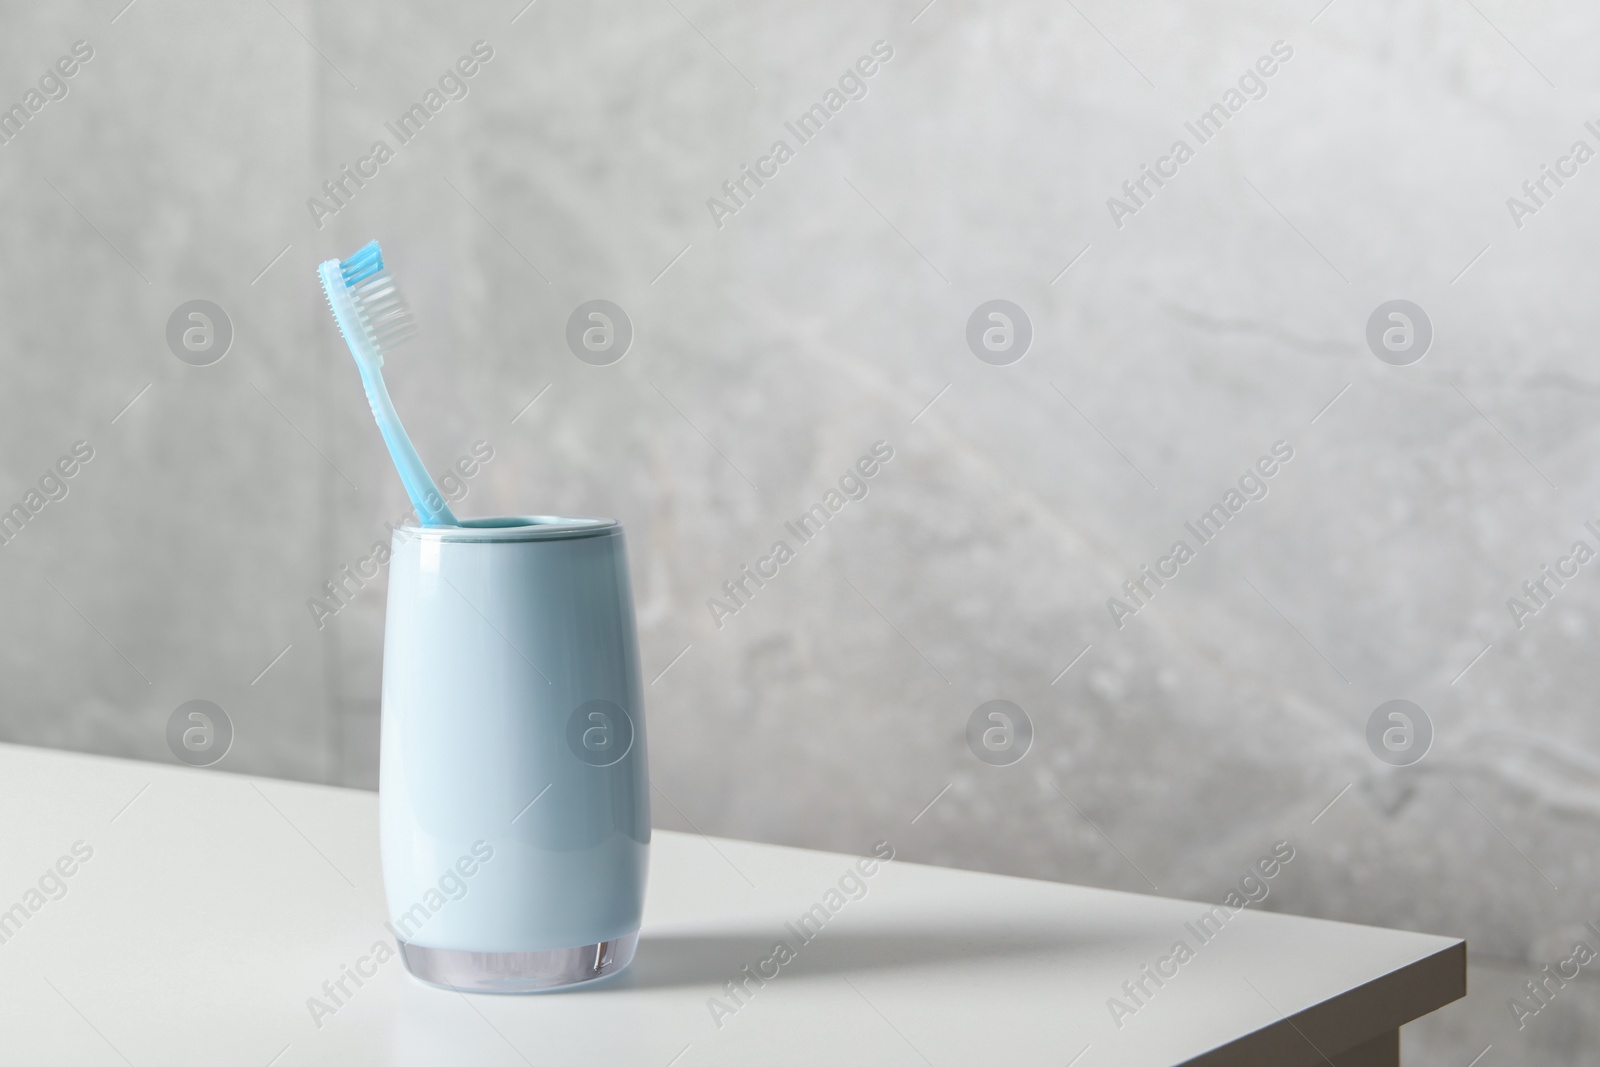 Photo of Plastic toothbrush in holder on white countertop, space for text